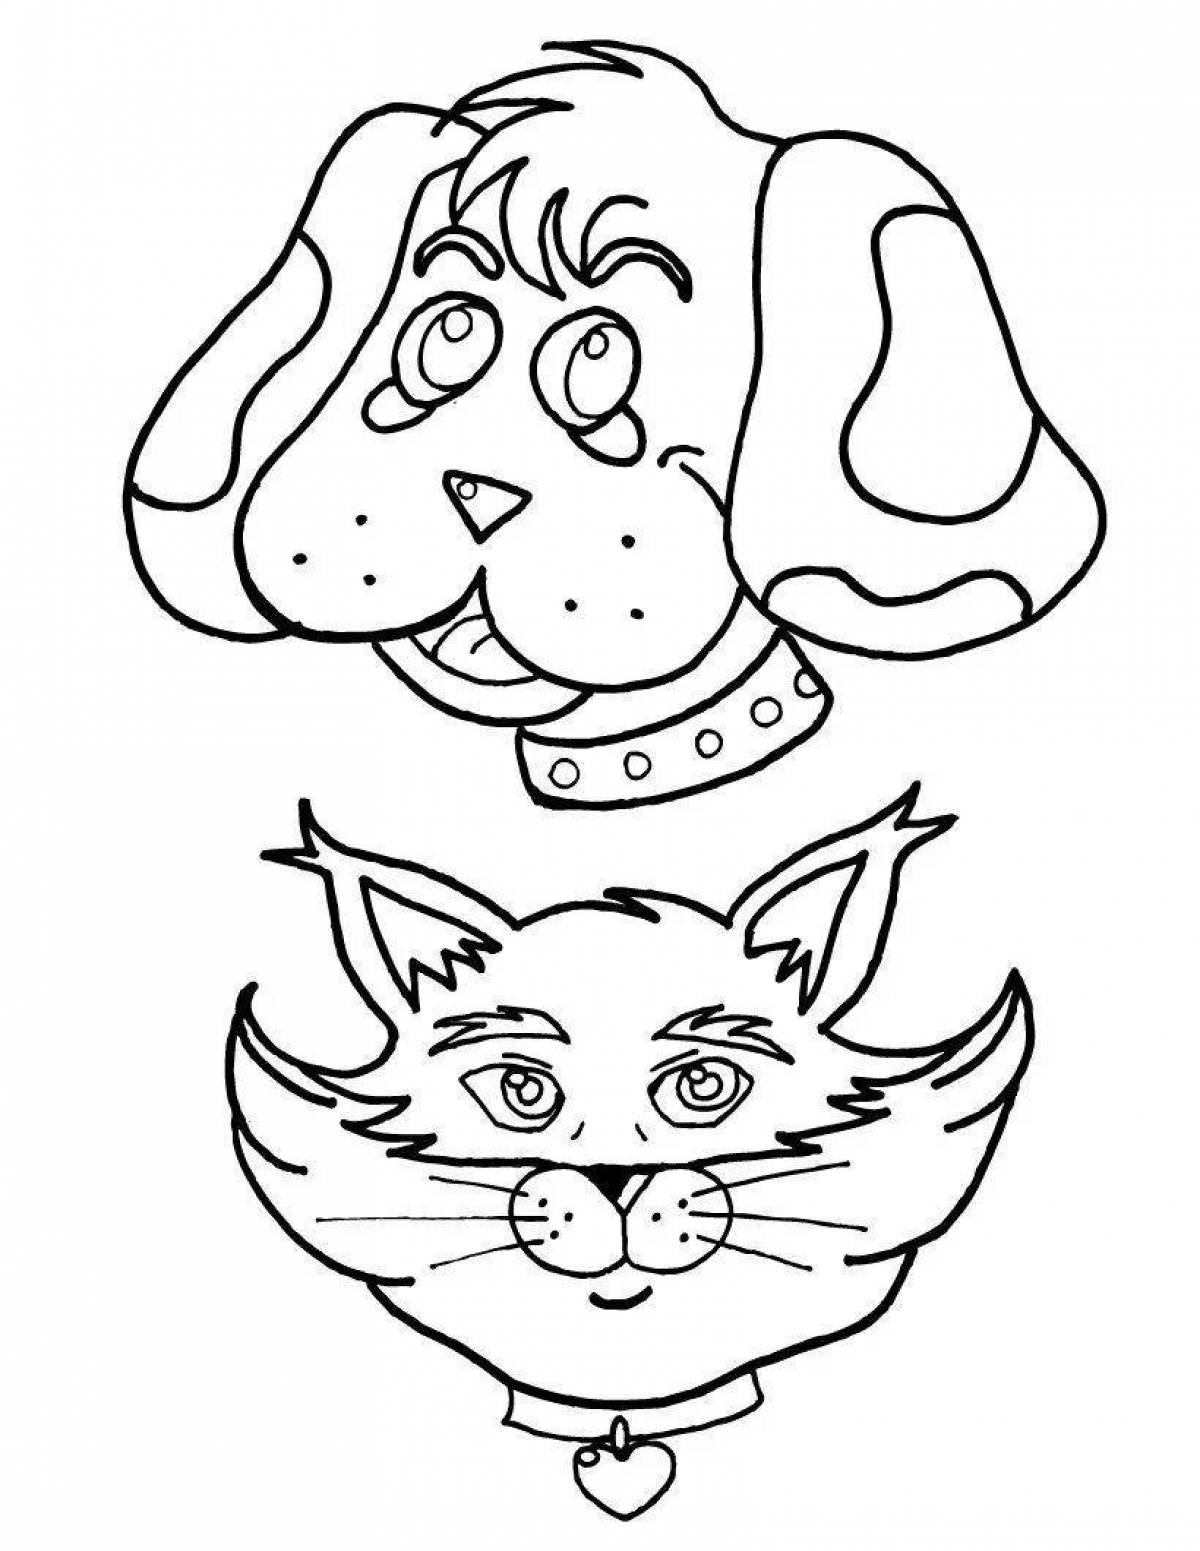 Coloring book playful dog and cat